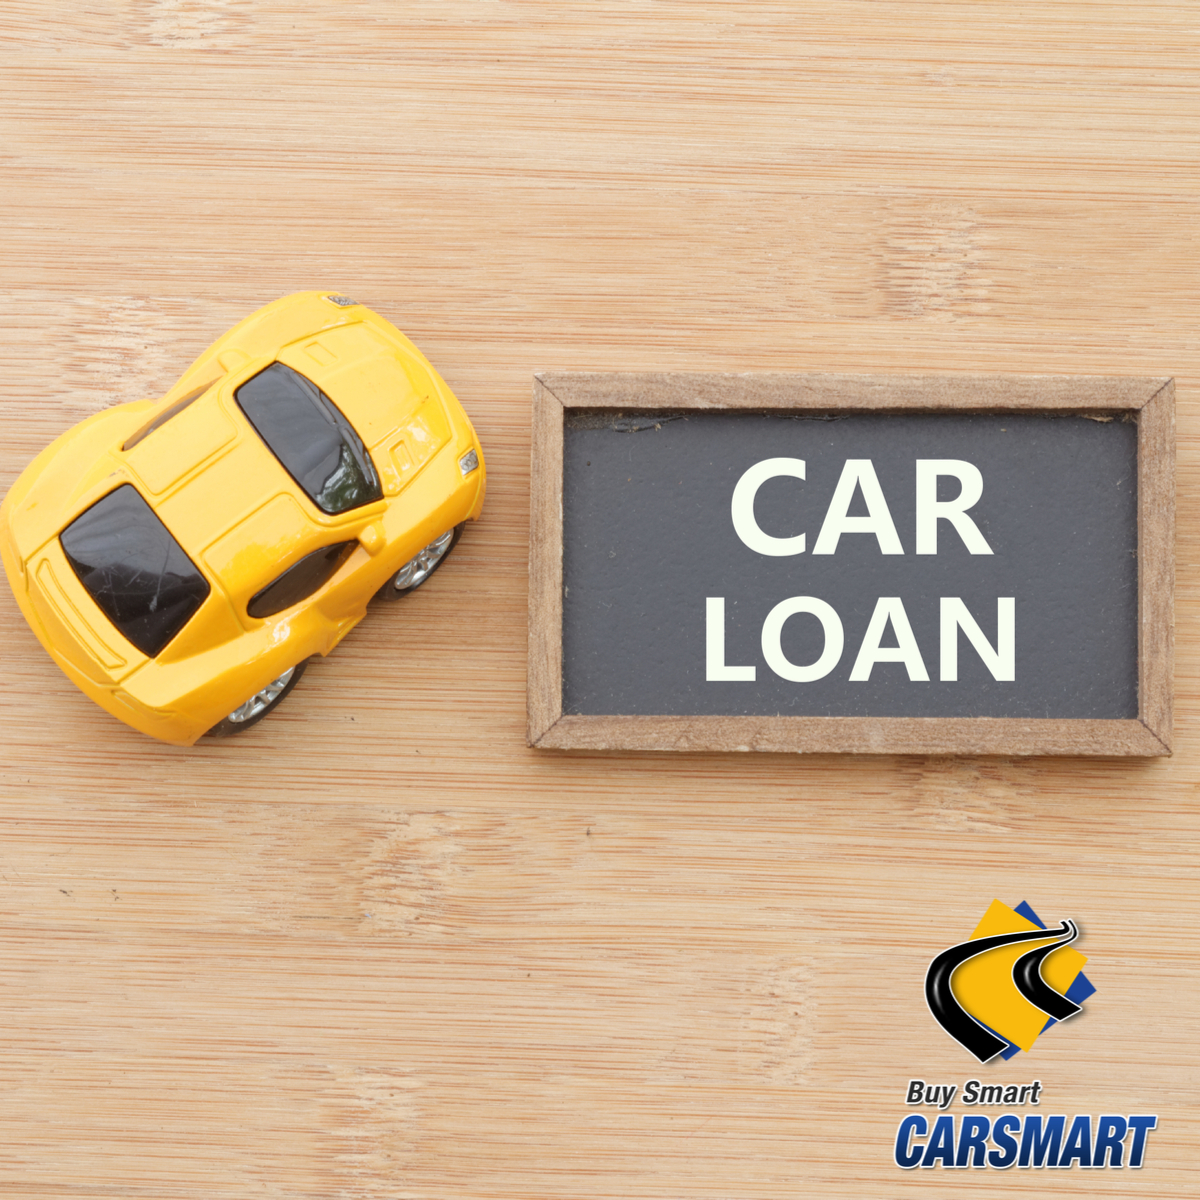 Can You Get an Approval for Car Loans in Rosaryville Based on Payment History and Credit Score?